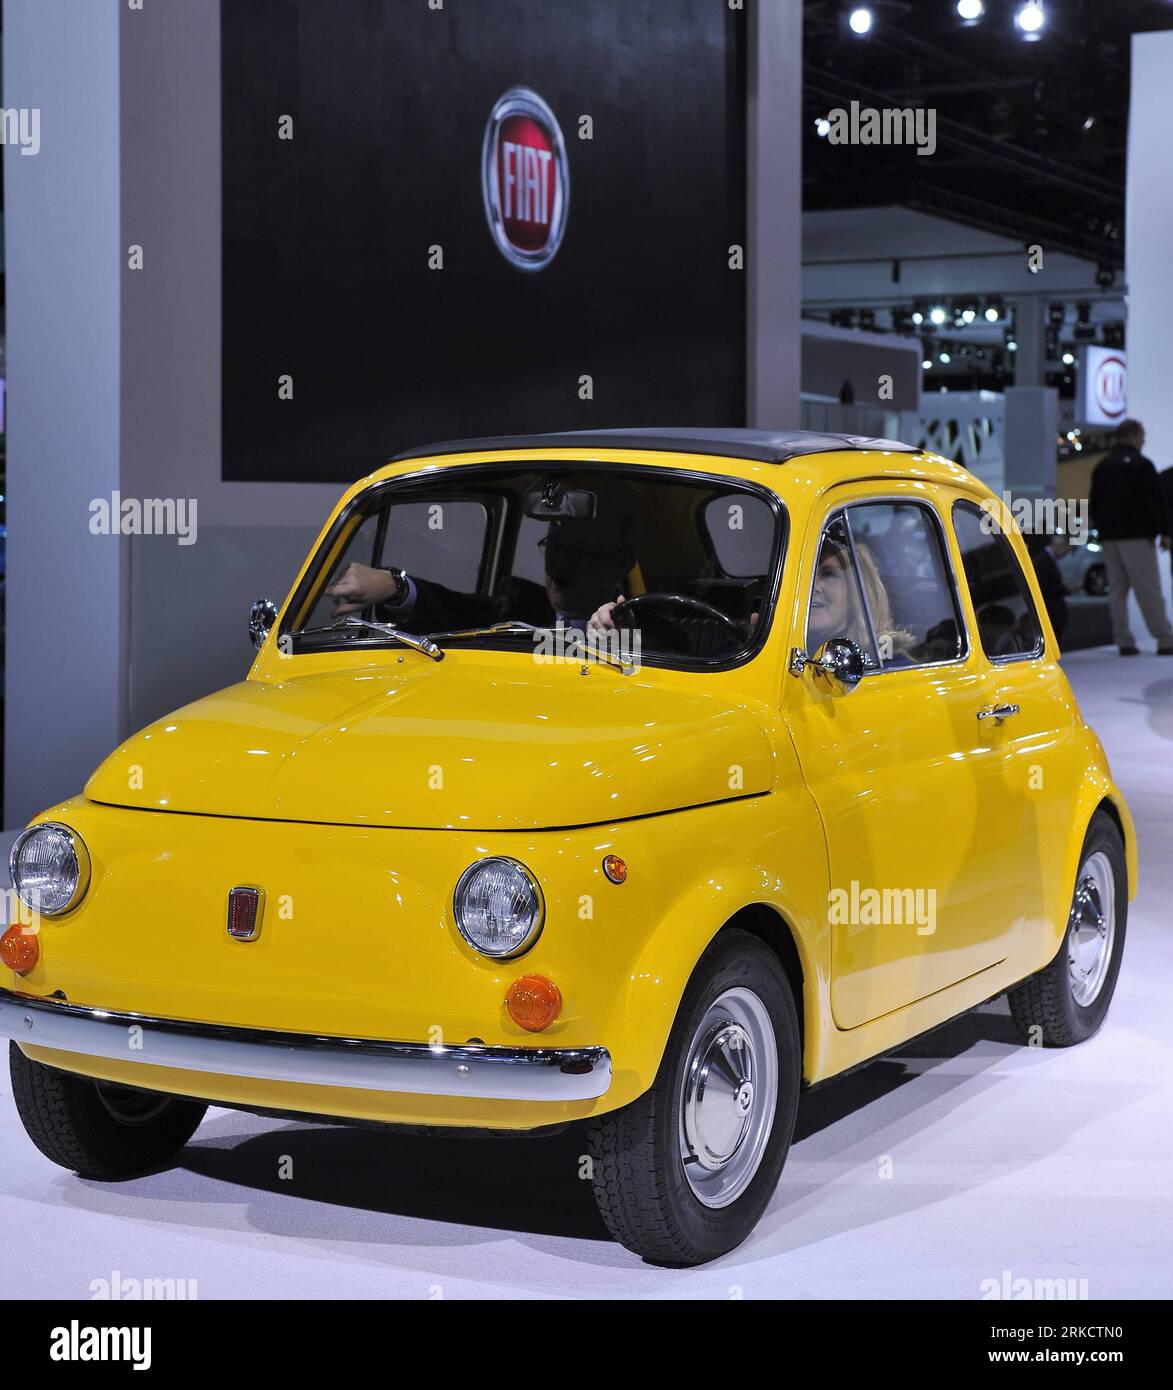 Bildnummer: 54804542  Datum: 11.01.2011  Copyright: imago/Xinhua (110112) -- DETROIT, Jan. 12, 2011 (Xinhua) -- The 1970 Fiat 500L is displayed during the North American International Auto Show (NAIAS) in Detroit, the United States, Jan. 11, 2011. More than 5,000 journalists worldwide would attend the world s premier auto industry events. It was forecast that more than 700,000 visitors would attend the gala this year, which runs through January 23. (Xinhua/Zhang Jun)(msq) U.S.-DETROIT-AUTO SHOW PUBLICATIONxNOTxINxCHN Wirtschaft Automesse Objekte premiumd kbdig xsk 2011 quadrat Highlight  o0 Au Stock Photo